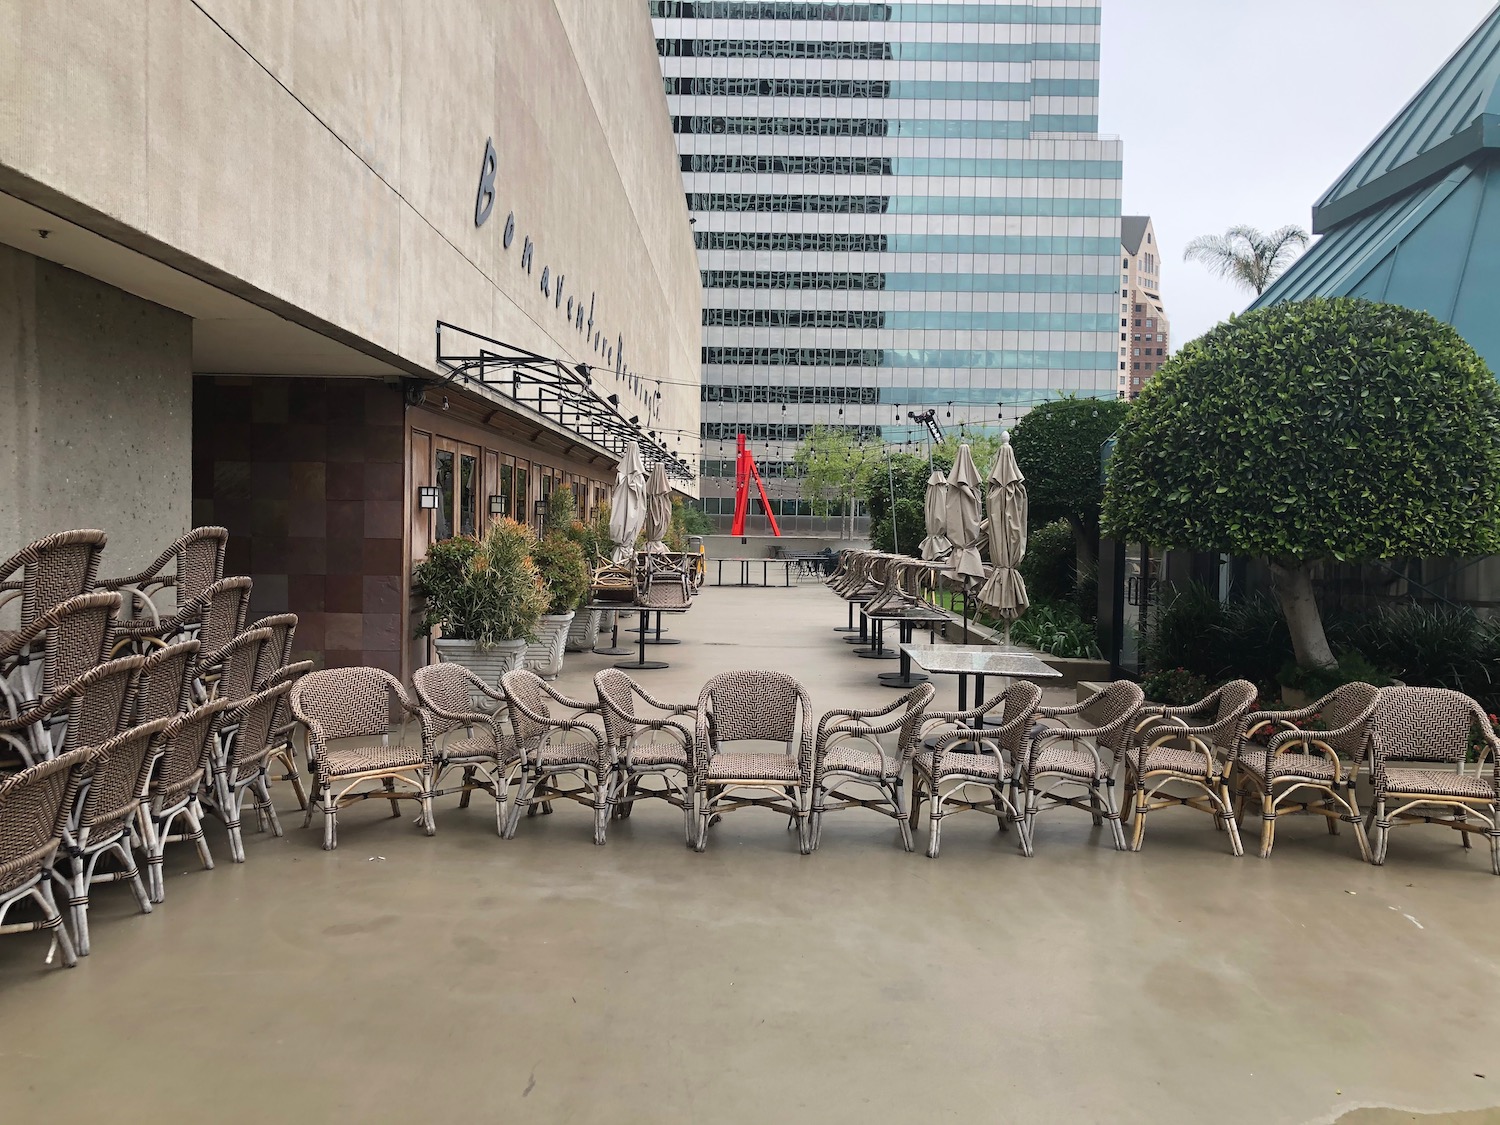 a group of chairs and tables outside a building